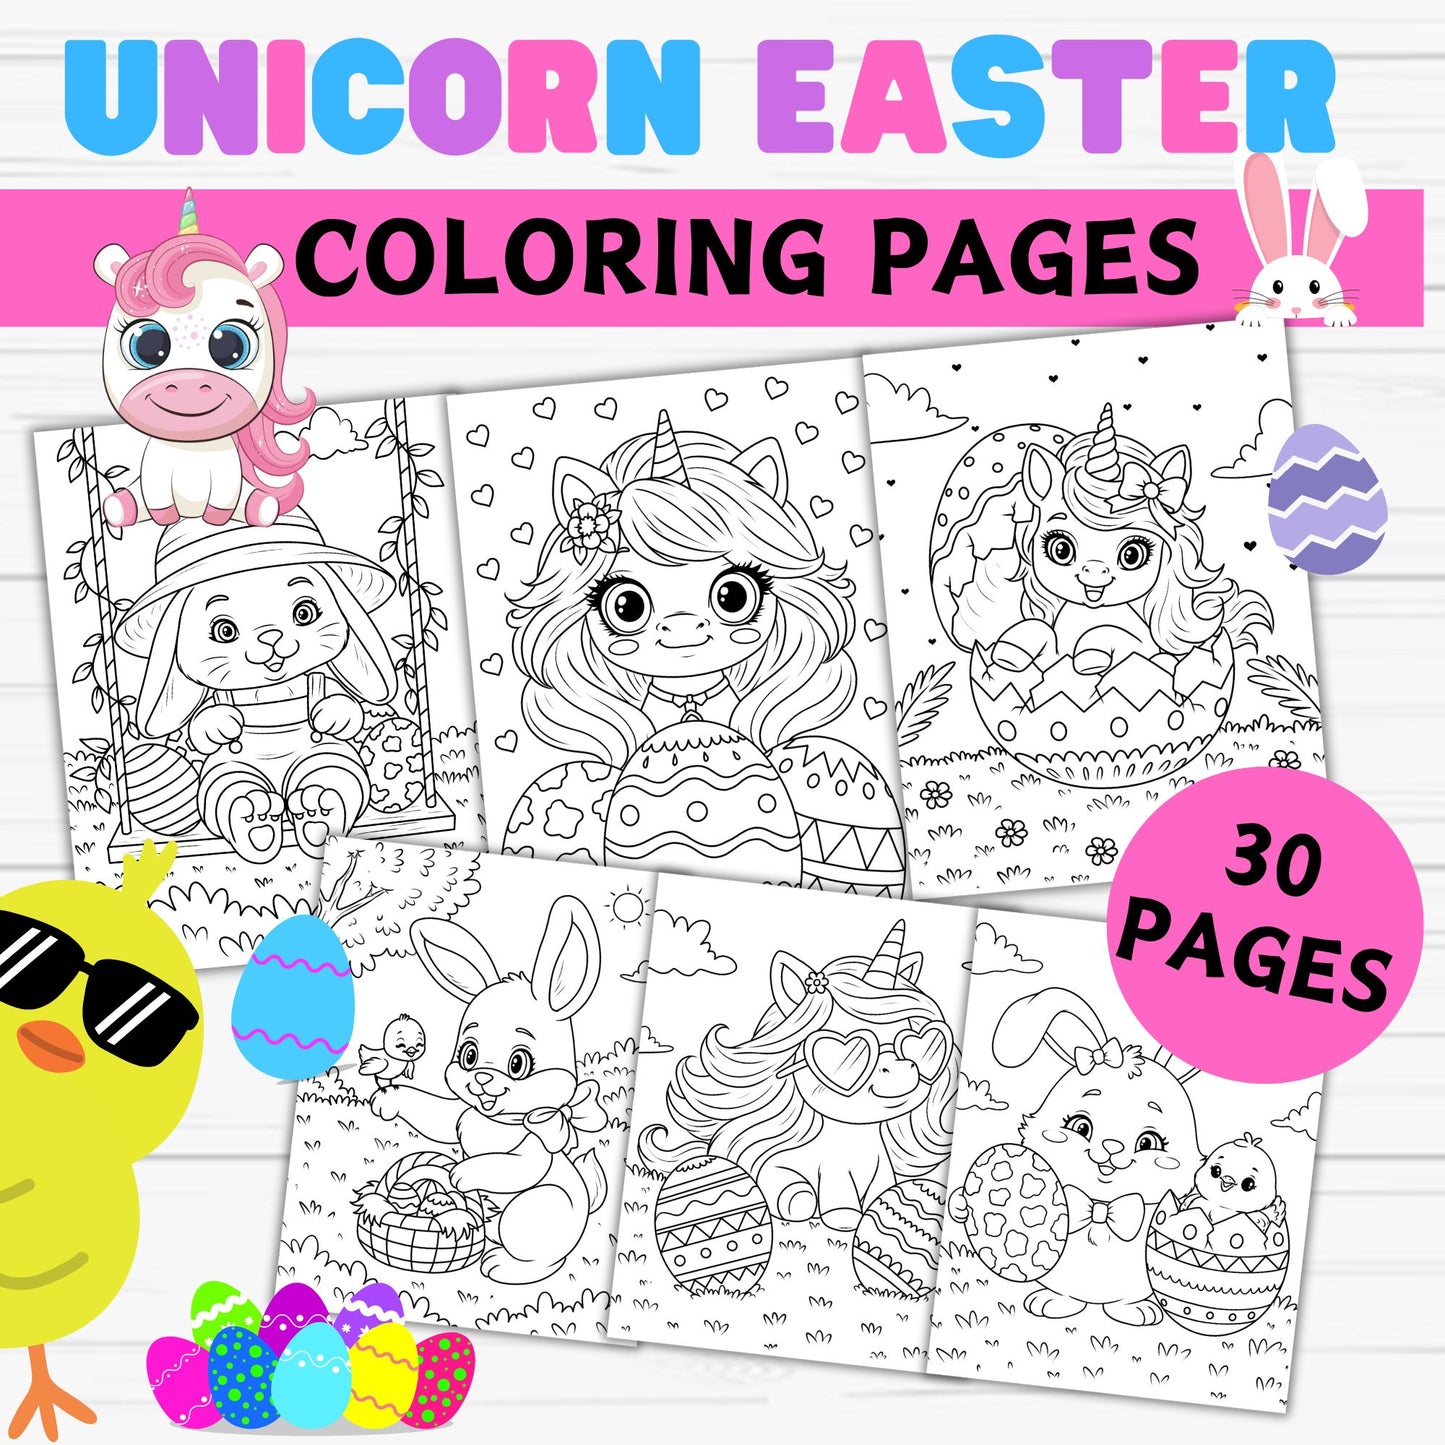 Unicorn Easter Coloring Pages - Printable Download